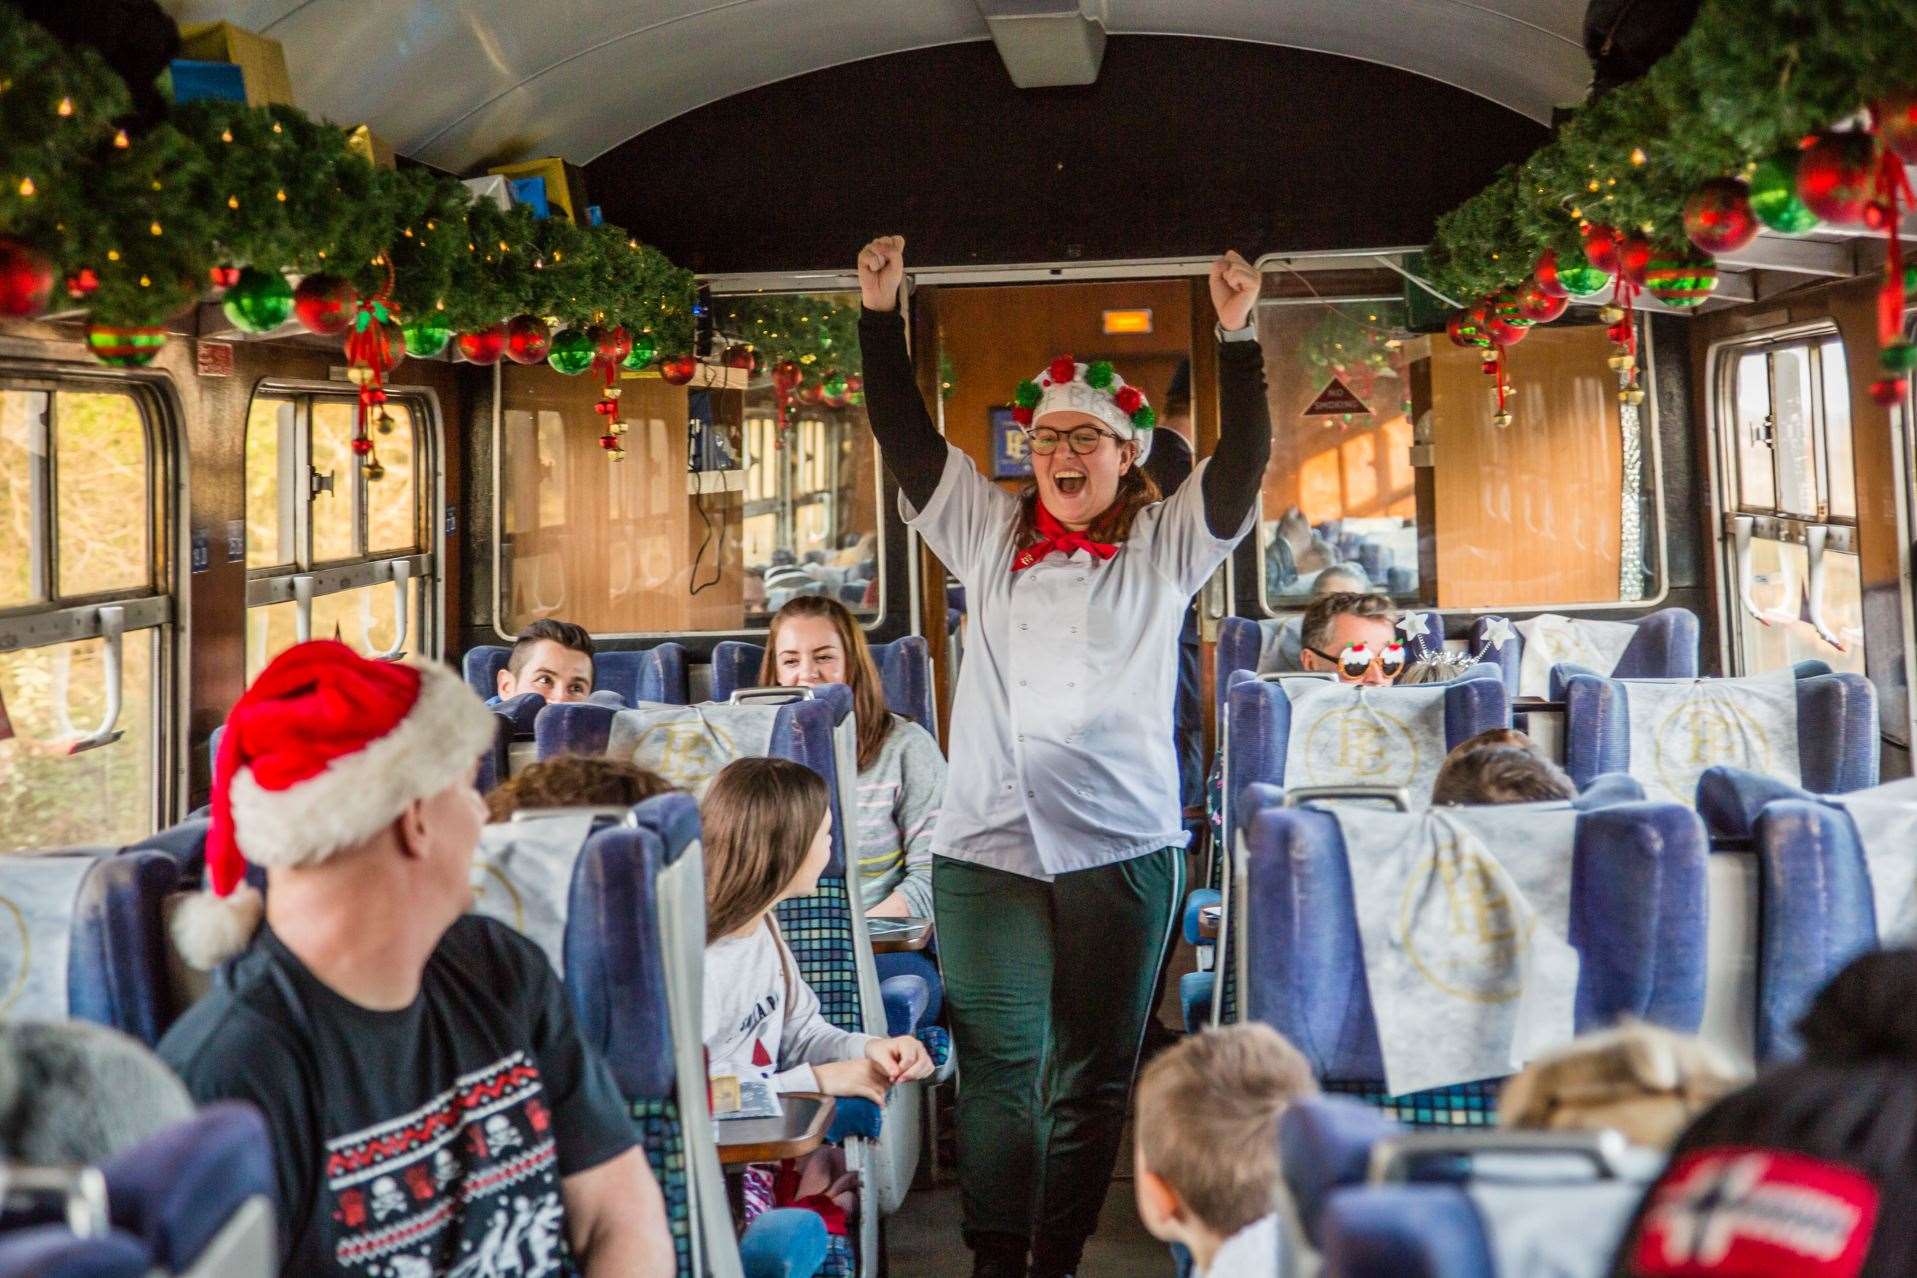 The Polar Express experience is coming to the Spa Valley Railway